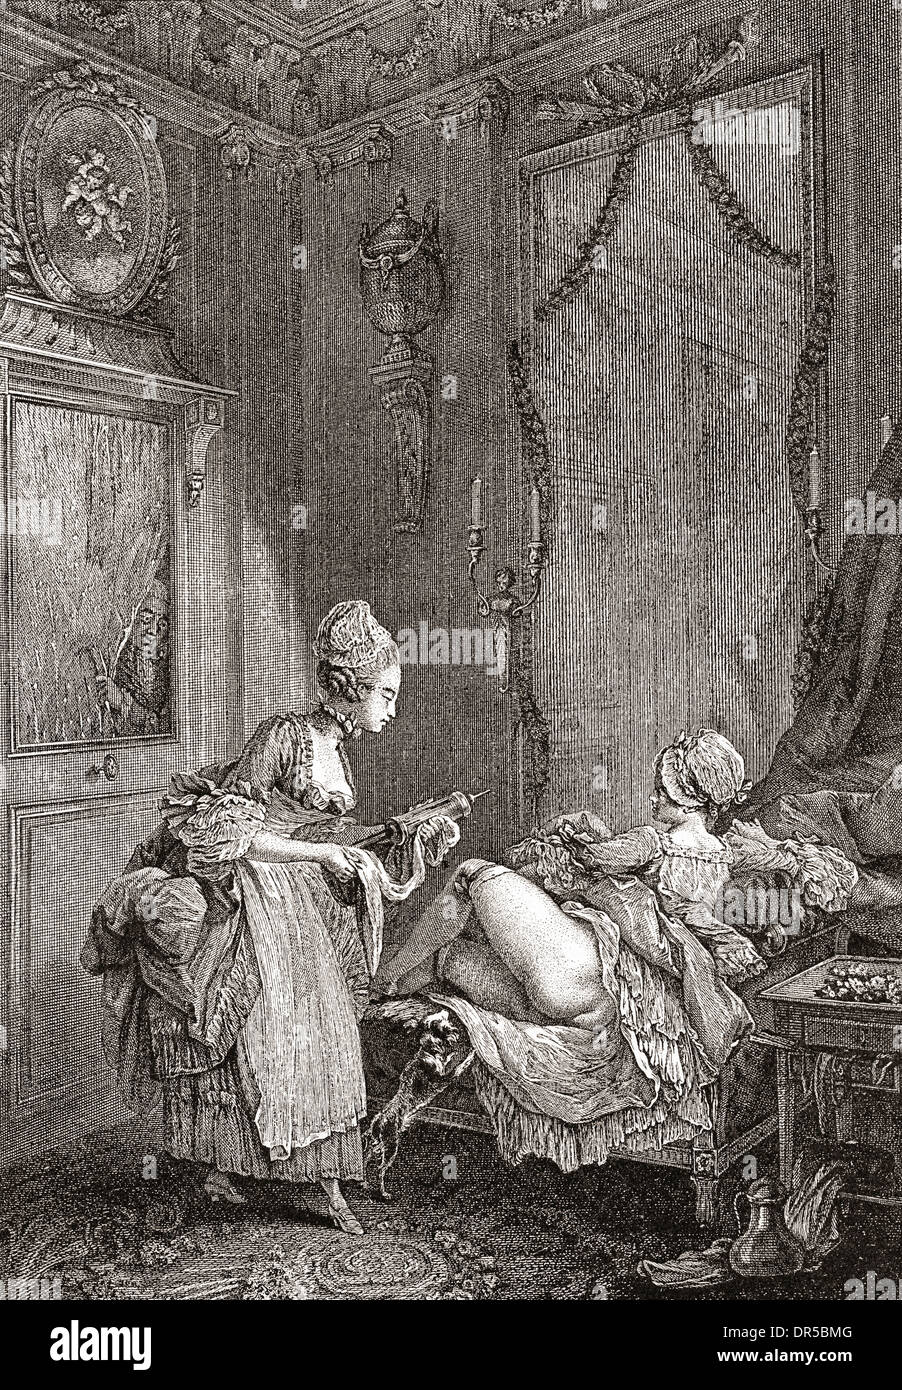 Medical enema, after a painting by P. A. Boudouin, 1770. Stock Photo